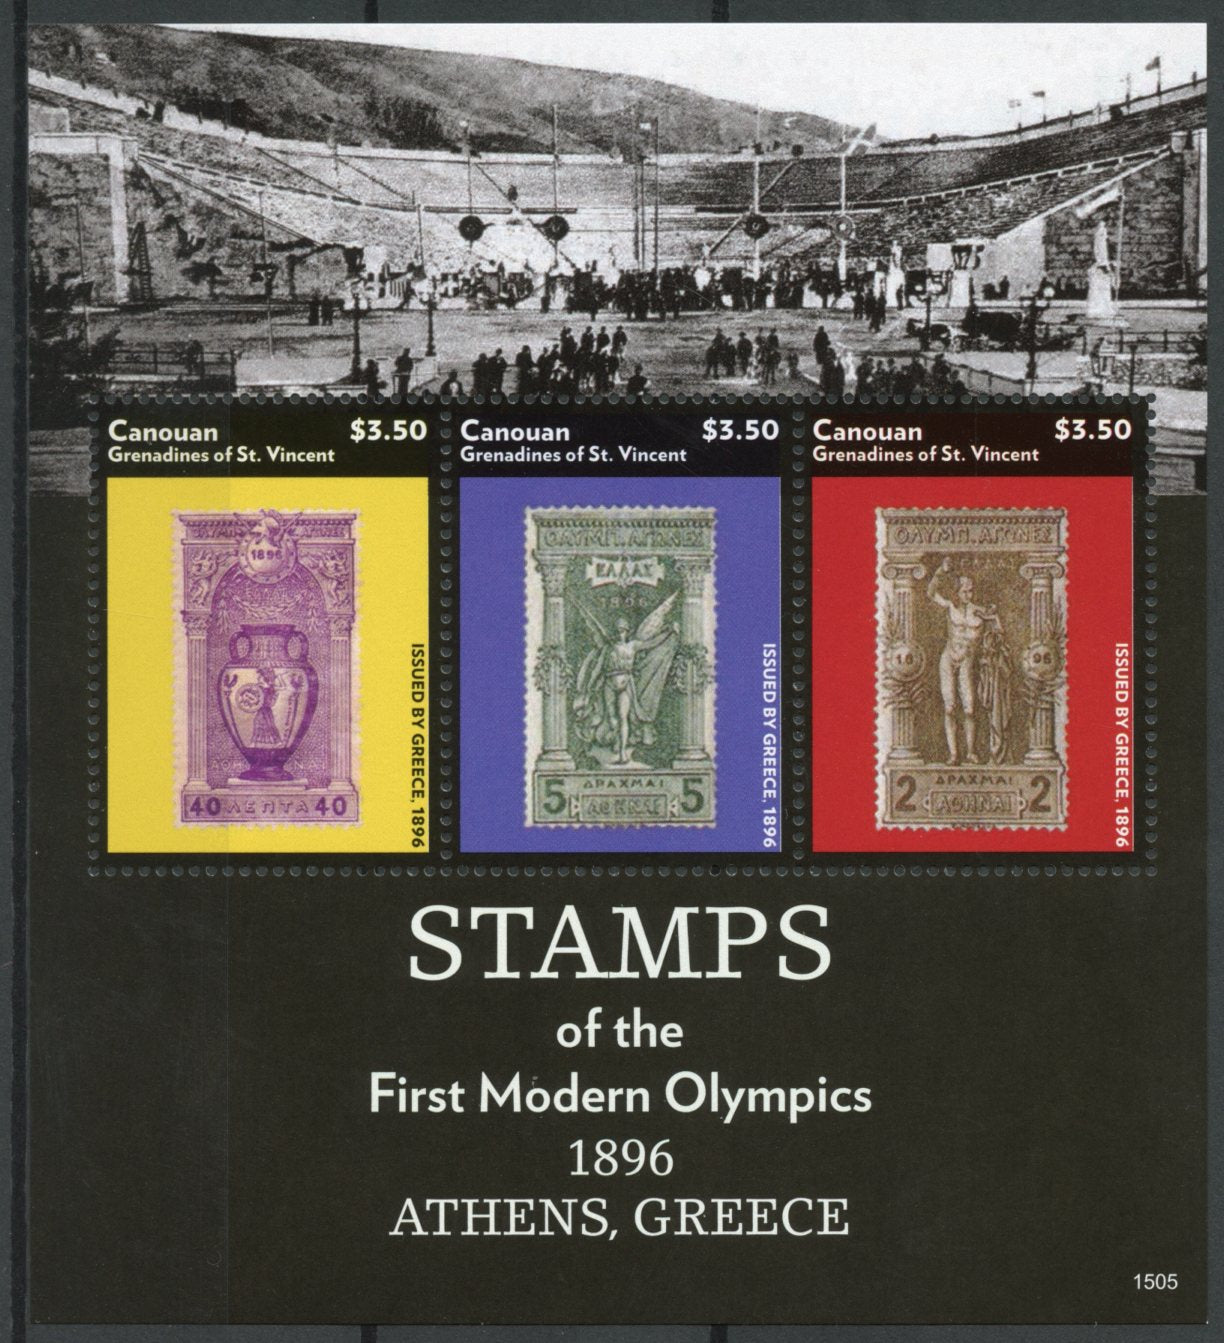 Canouan Gren St Vincent 2015 MNH Stamps-on-Stamps Stamps First Modern Olympics Athens SOS 3v M/S